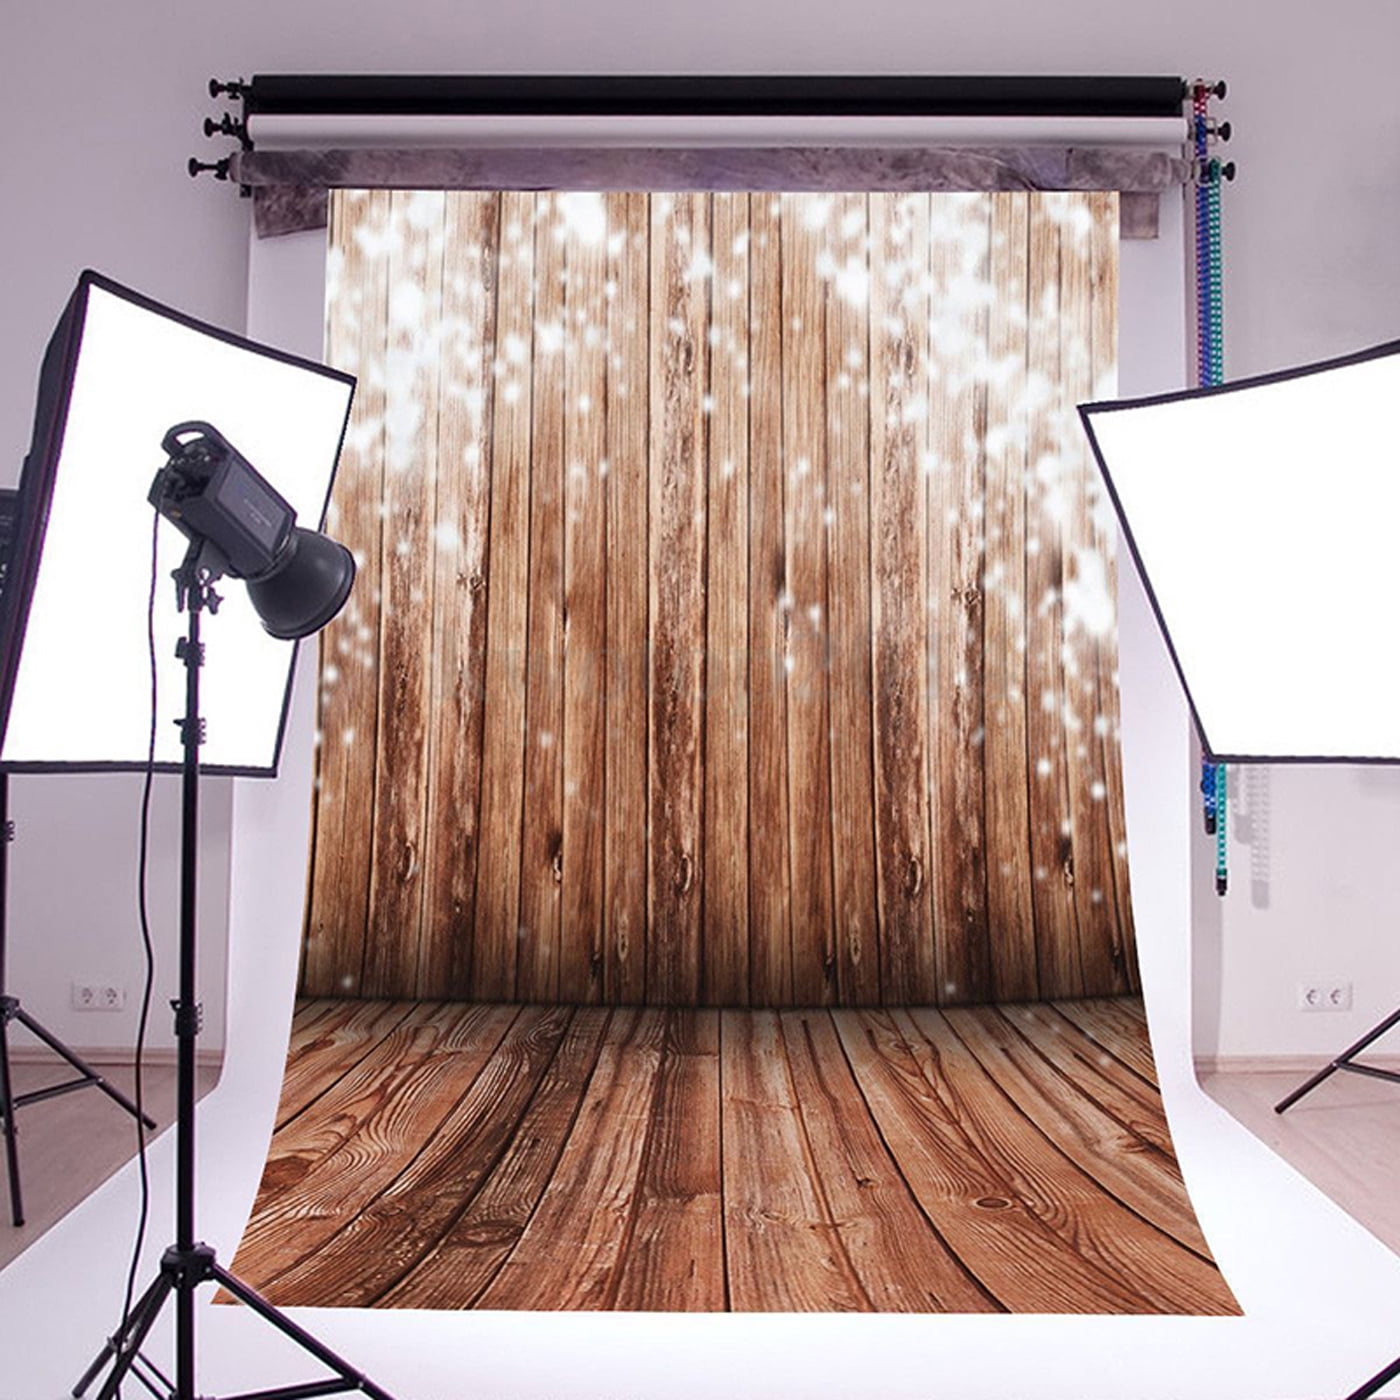 Theme Photography Background 3d Digital Printing Retro Wood Grain Background Cloth Collapsible Backdrop For Studio Indoor And Outdoor Photography Without Wrinkles Photo Studio Video Shooting 